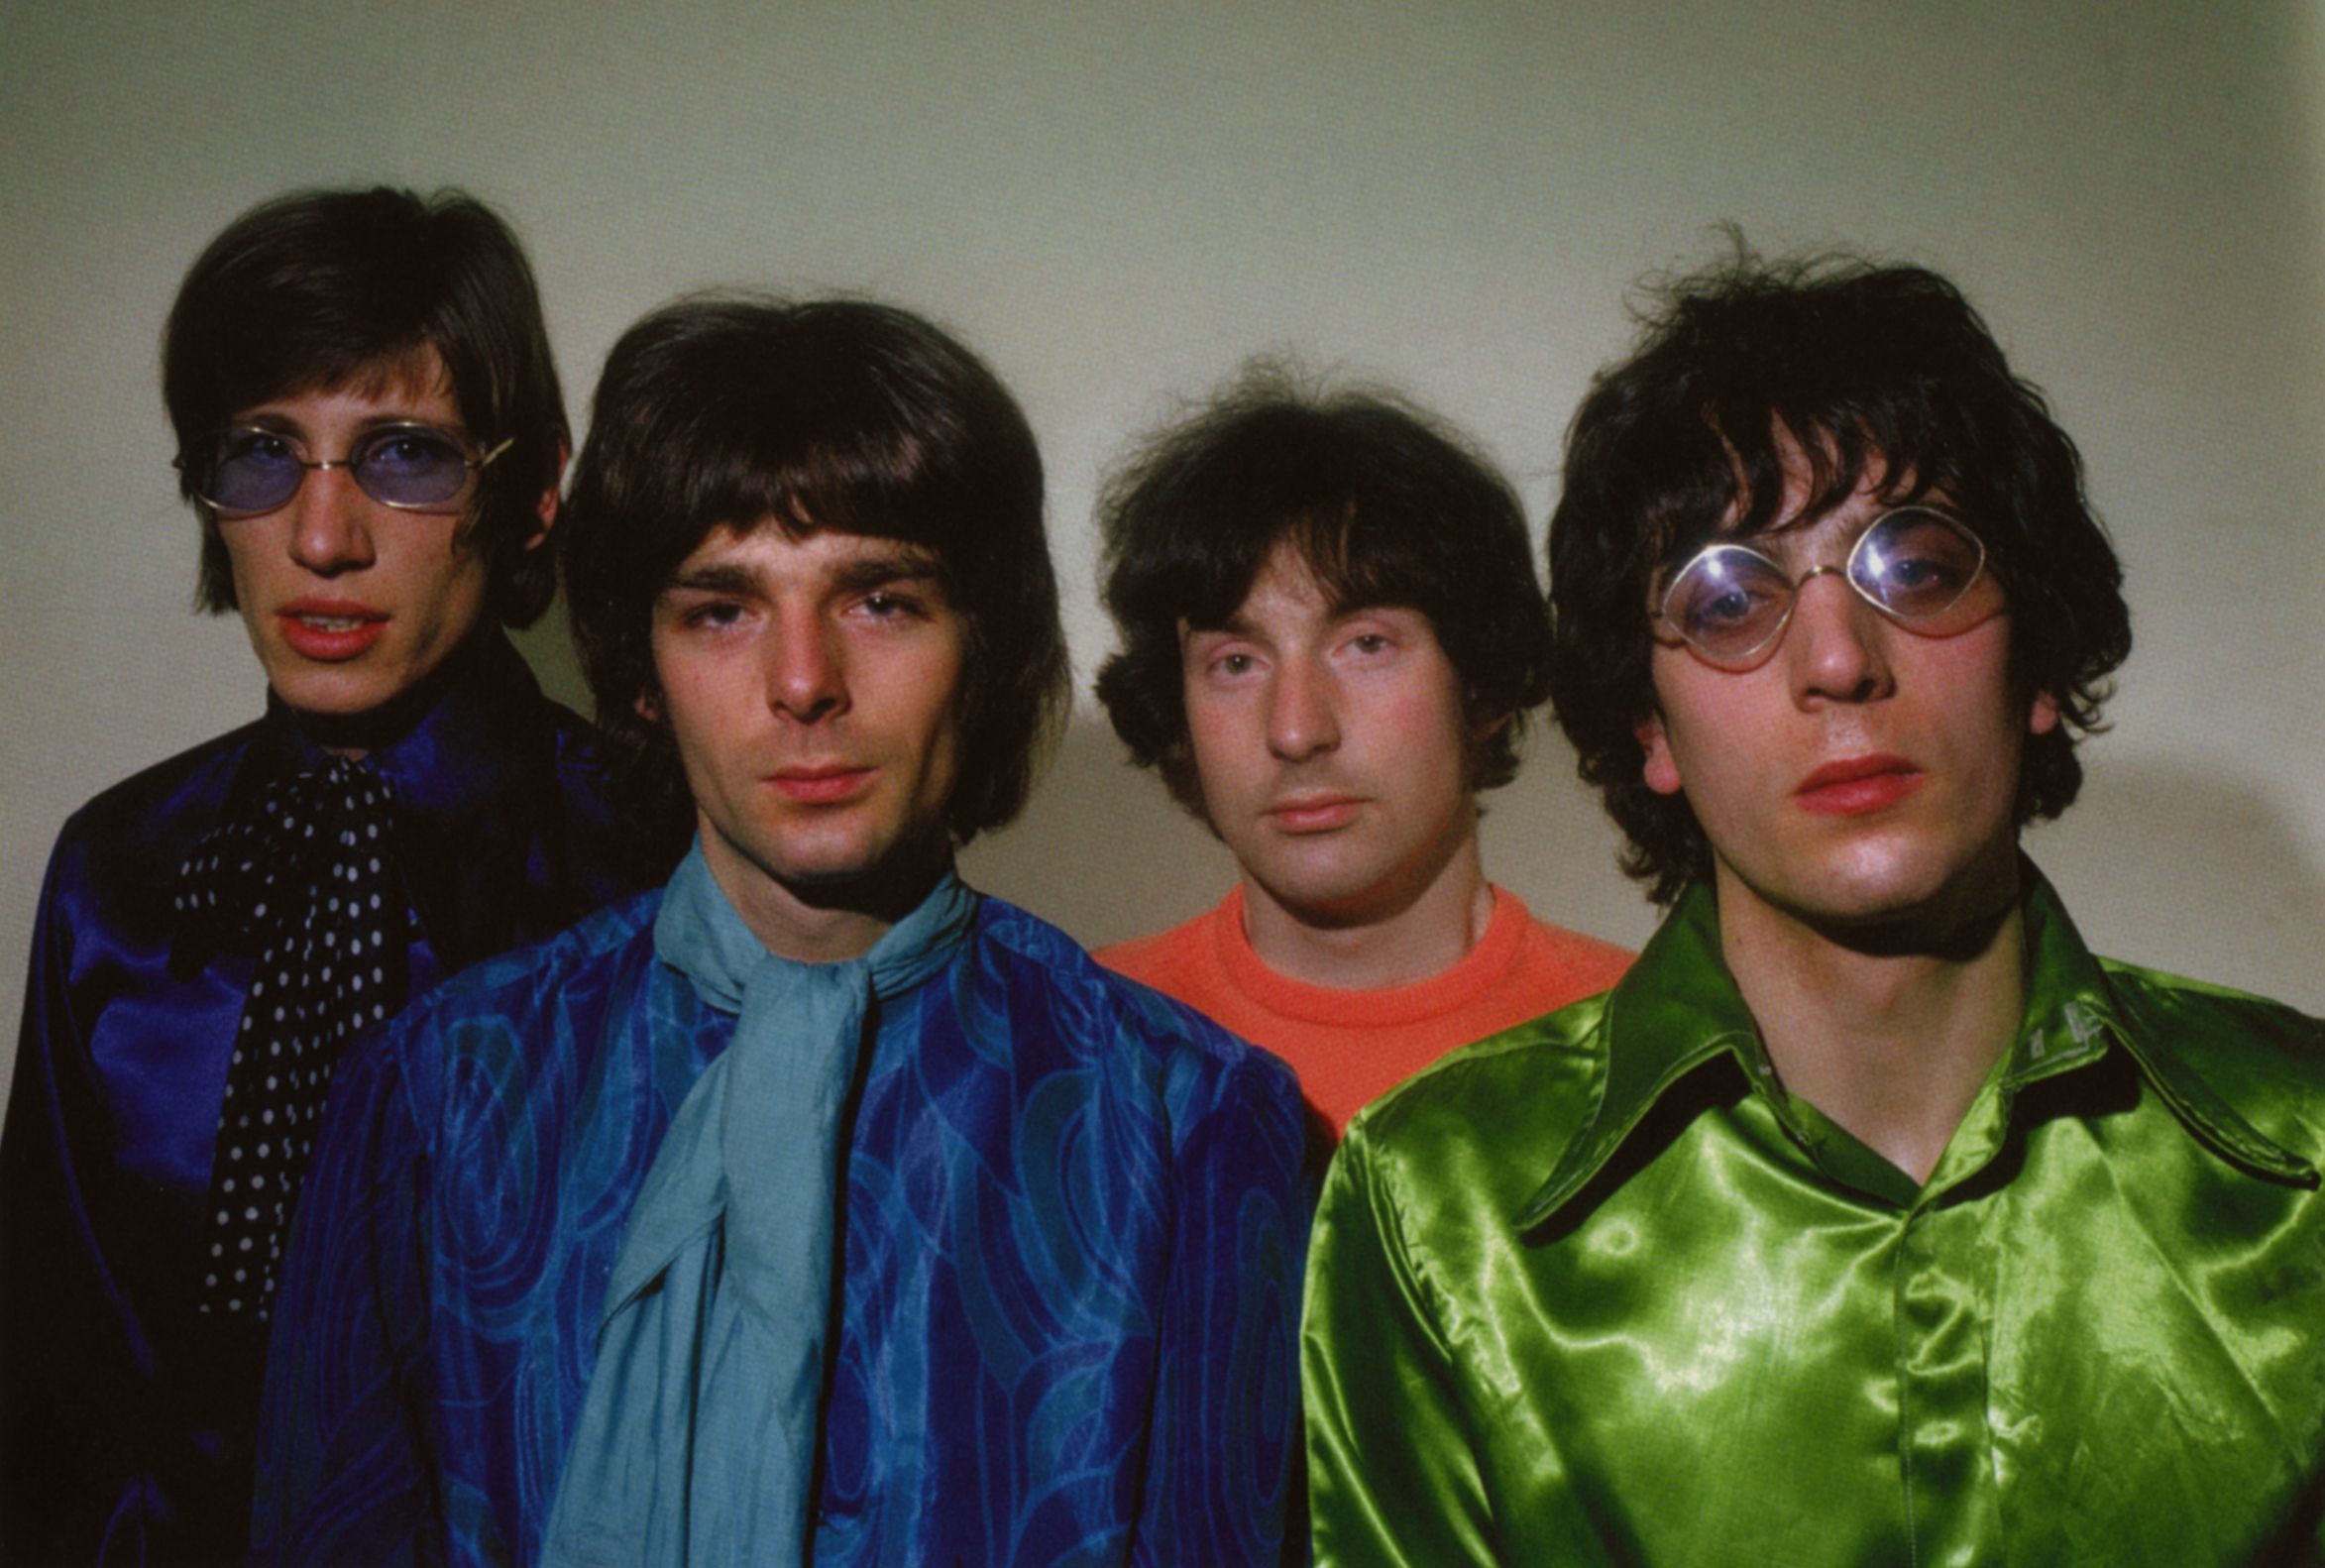 Four men wearing psychedelic clothes face the camera